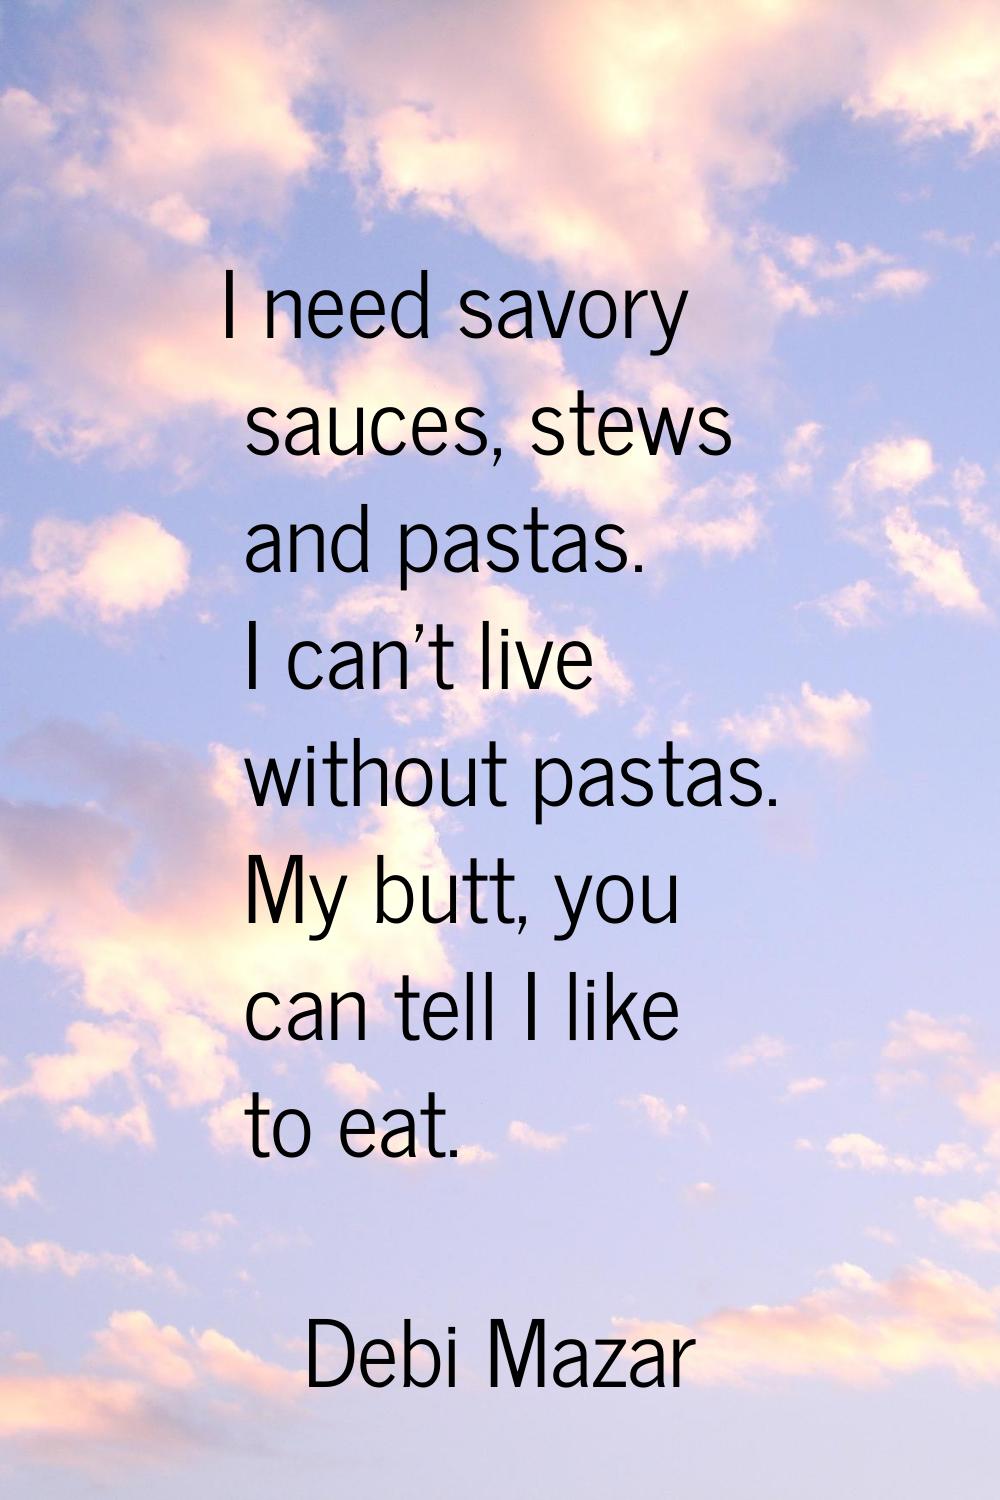 I need savory sauces, stews and pastas. I can't live without pastas. My butt, you can tell I like t